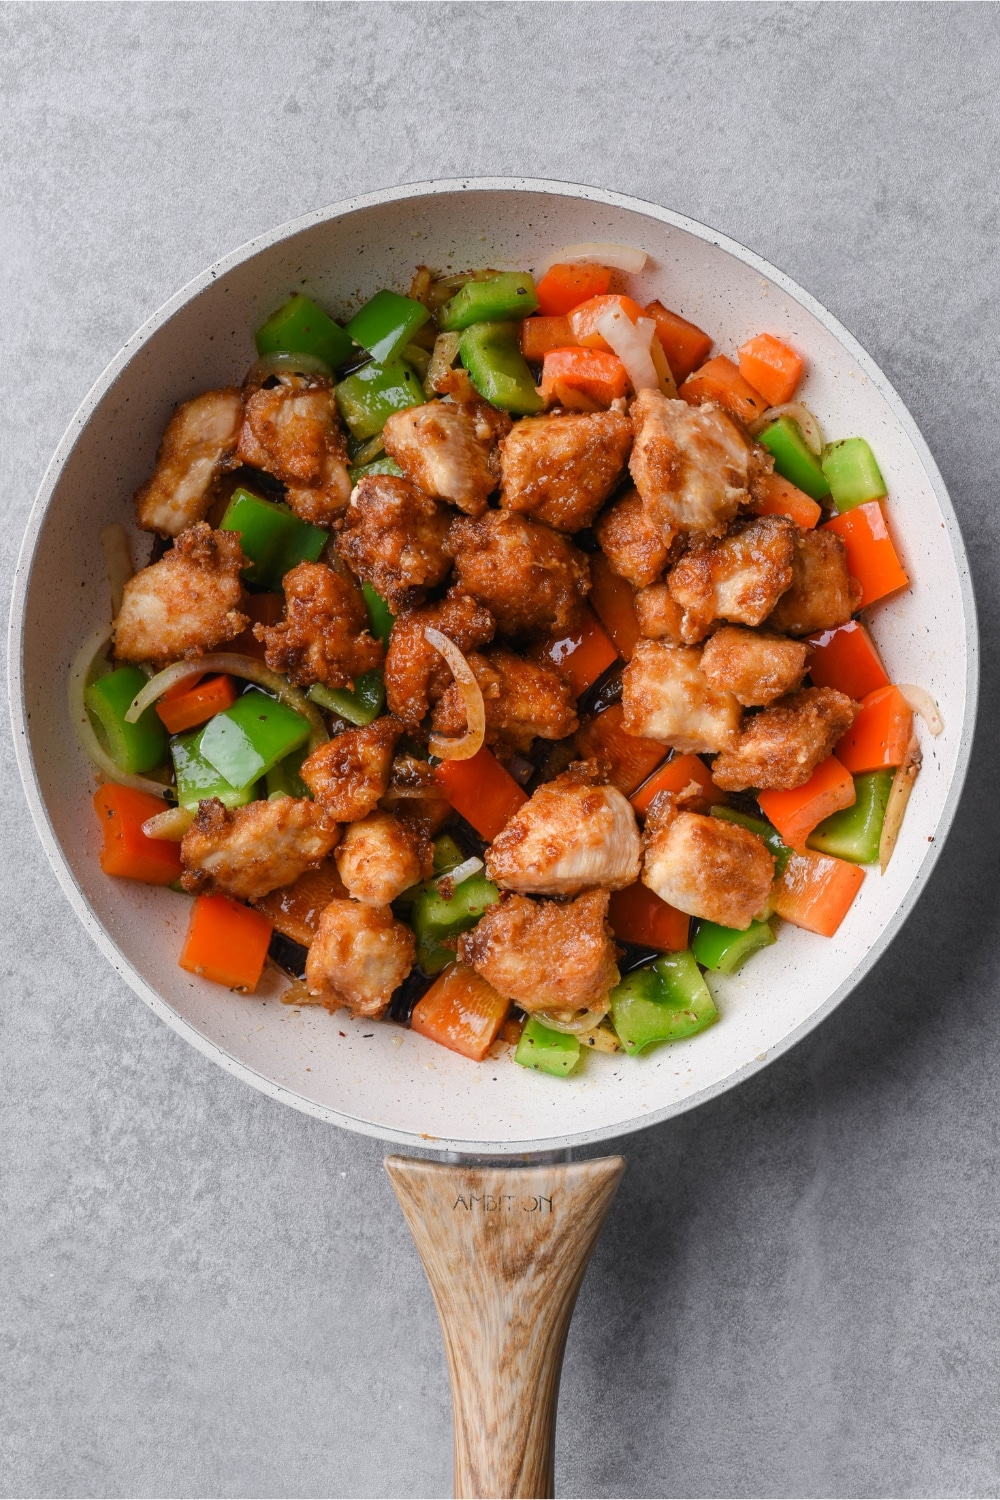 Fried pieces of chicken with sliced bell peppers and onions in a white skillet with a wooden handle.